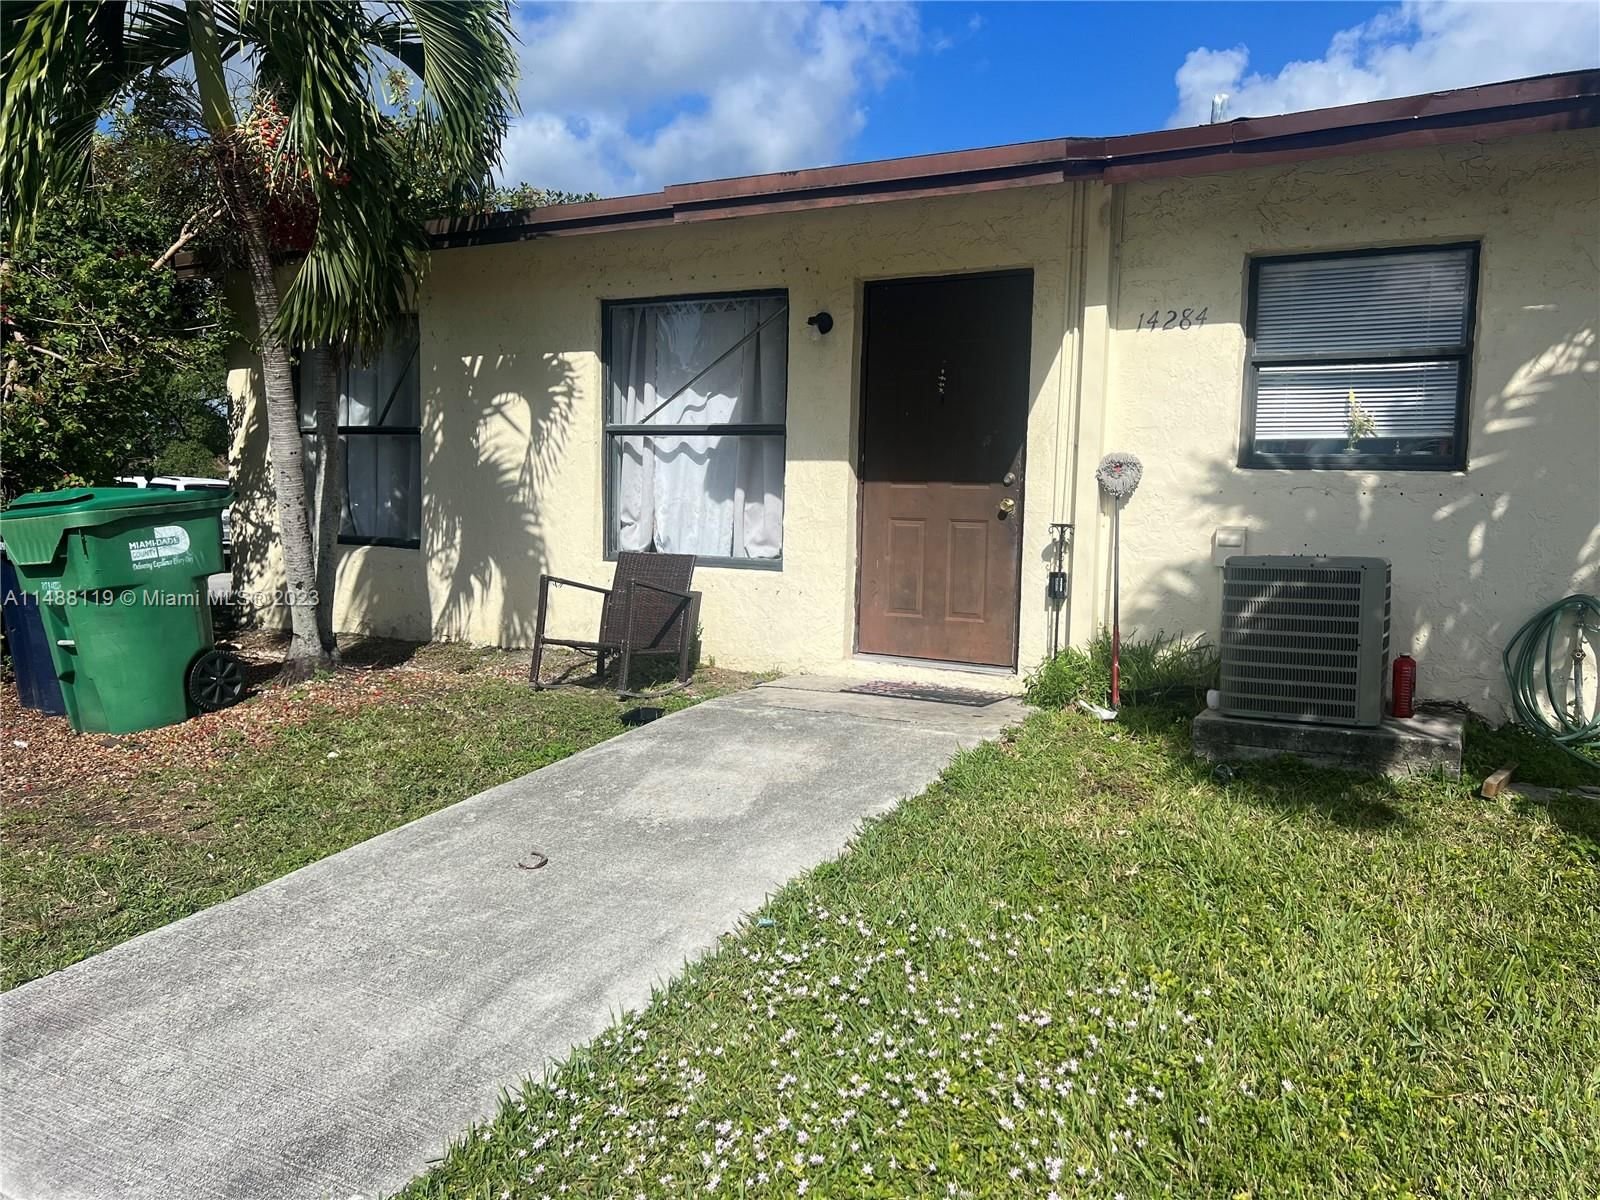 Real estate property located at 14284 283rd St, Miami-Dade County, SEAPINES, Homestead, FL